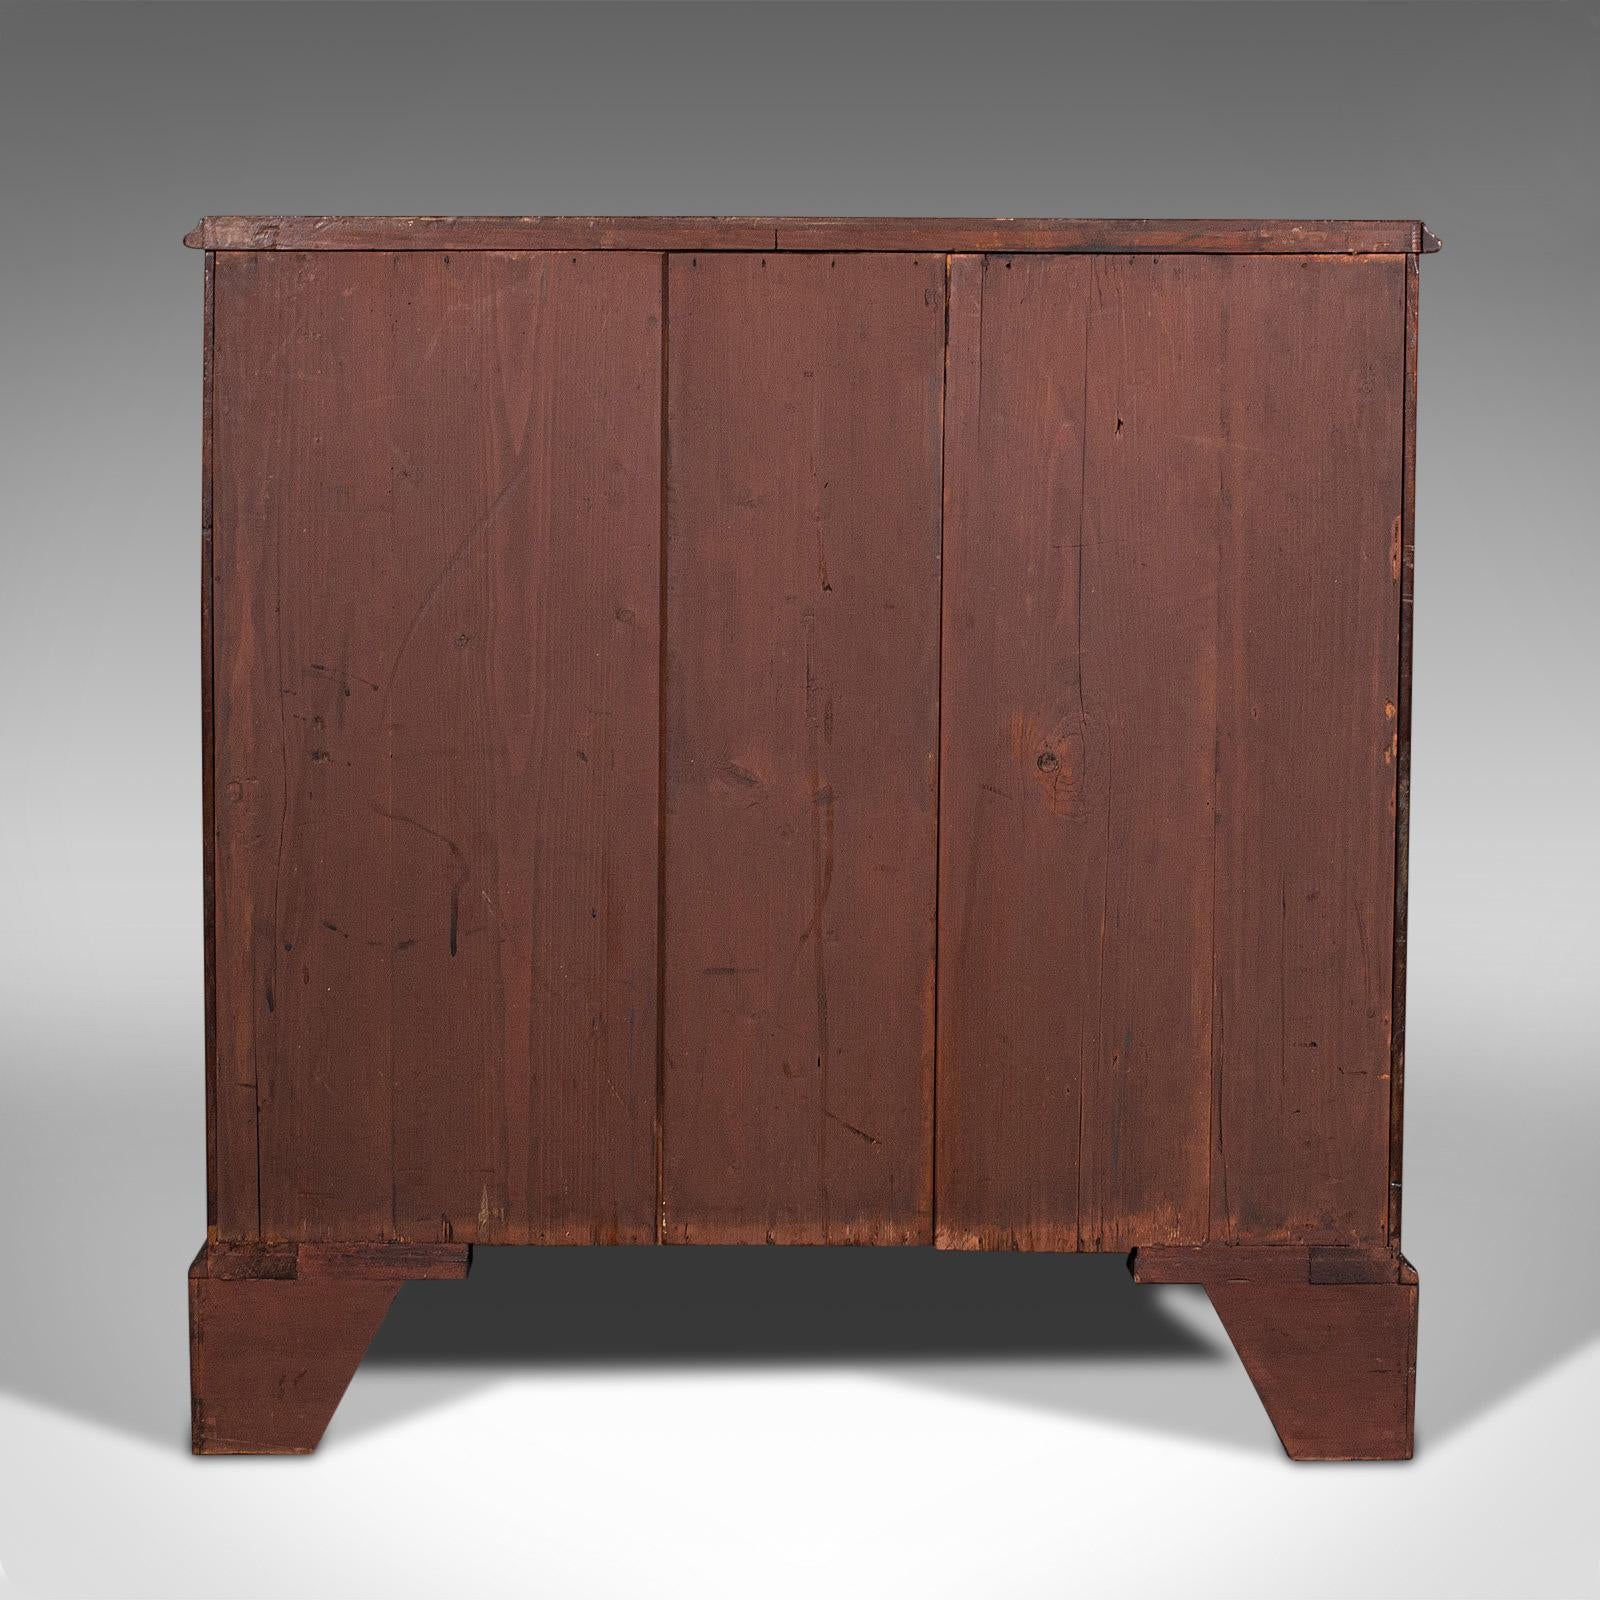 British Antique Gentleman's Chest of Drawers, English, Mahogany, Bedroom, Georgian, 1800 For Sale